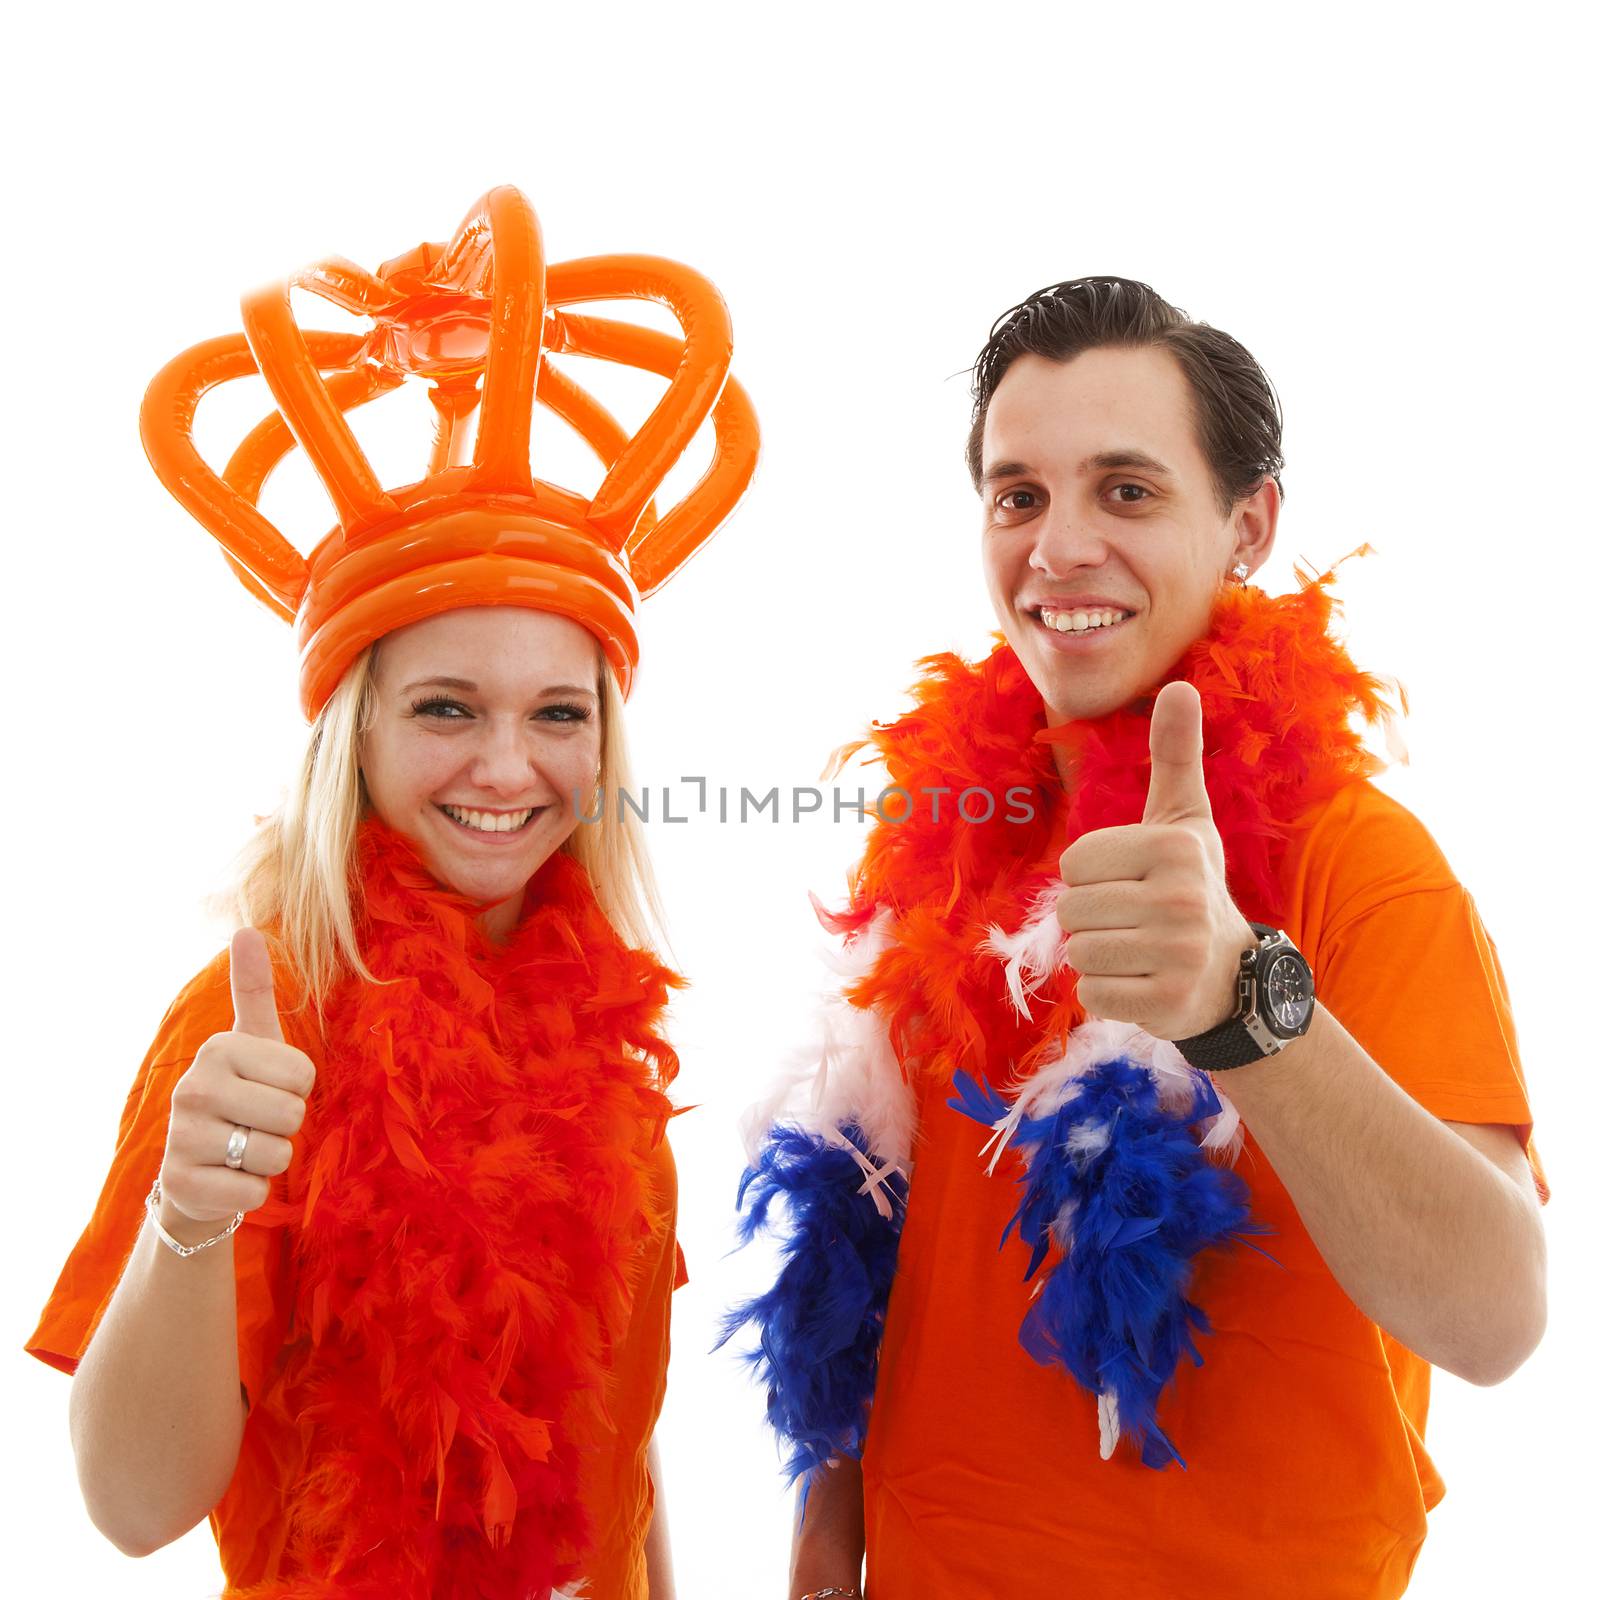 Couple of Dutch soccer supporters cheer over white background